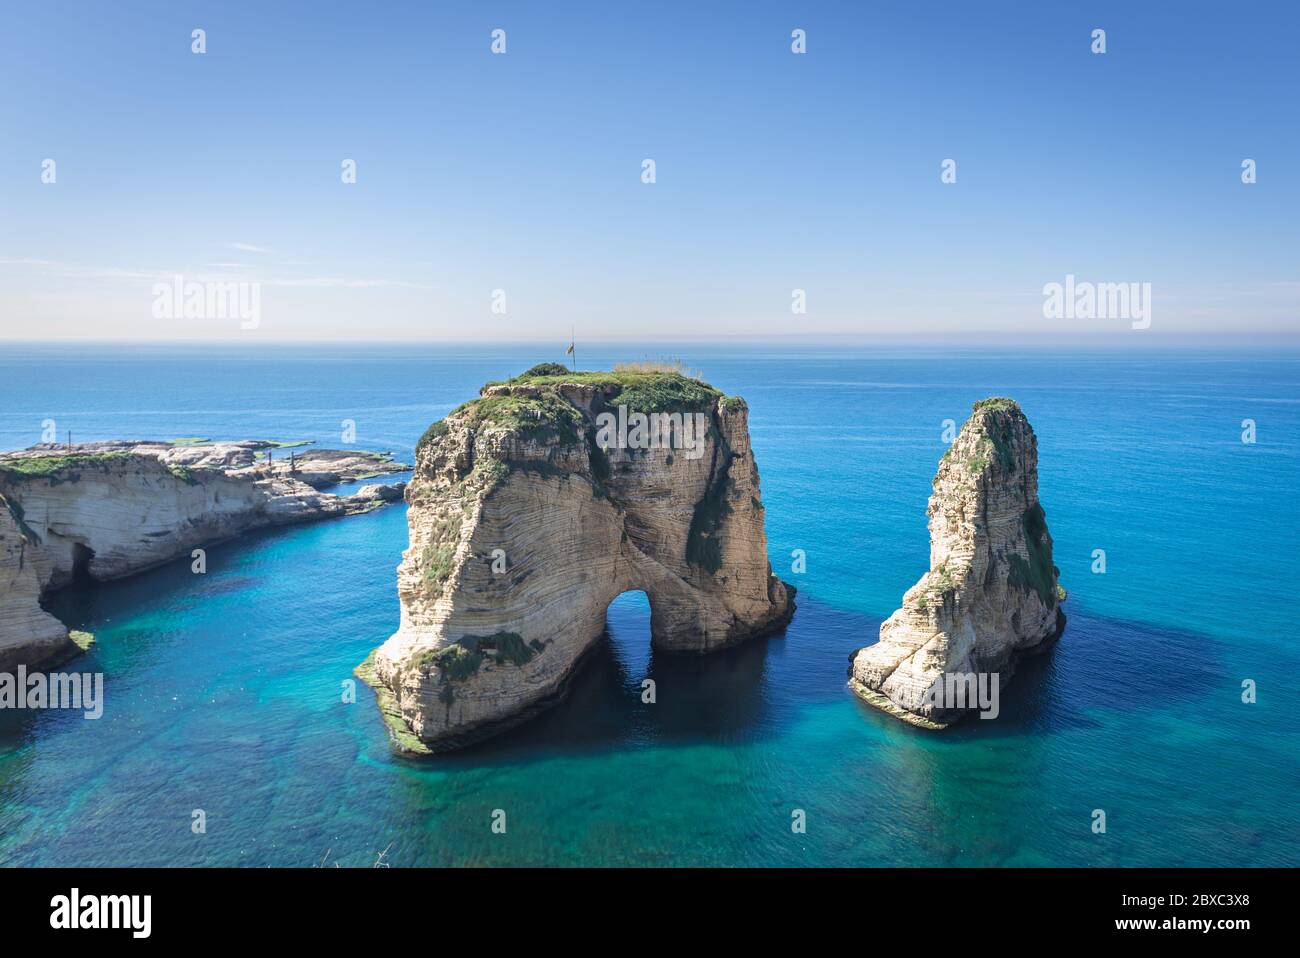 Pigeon Rock in Raouche area of Beirut, Lebanon Stock Photo